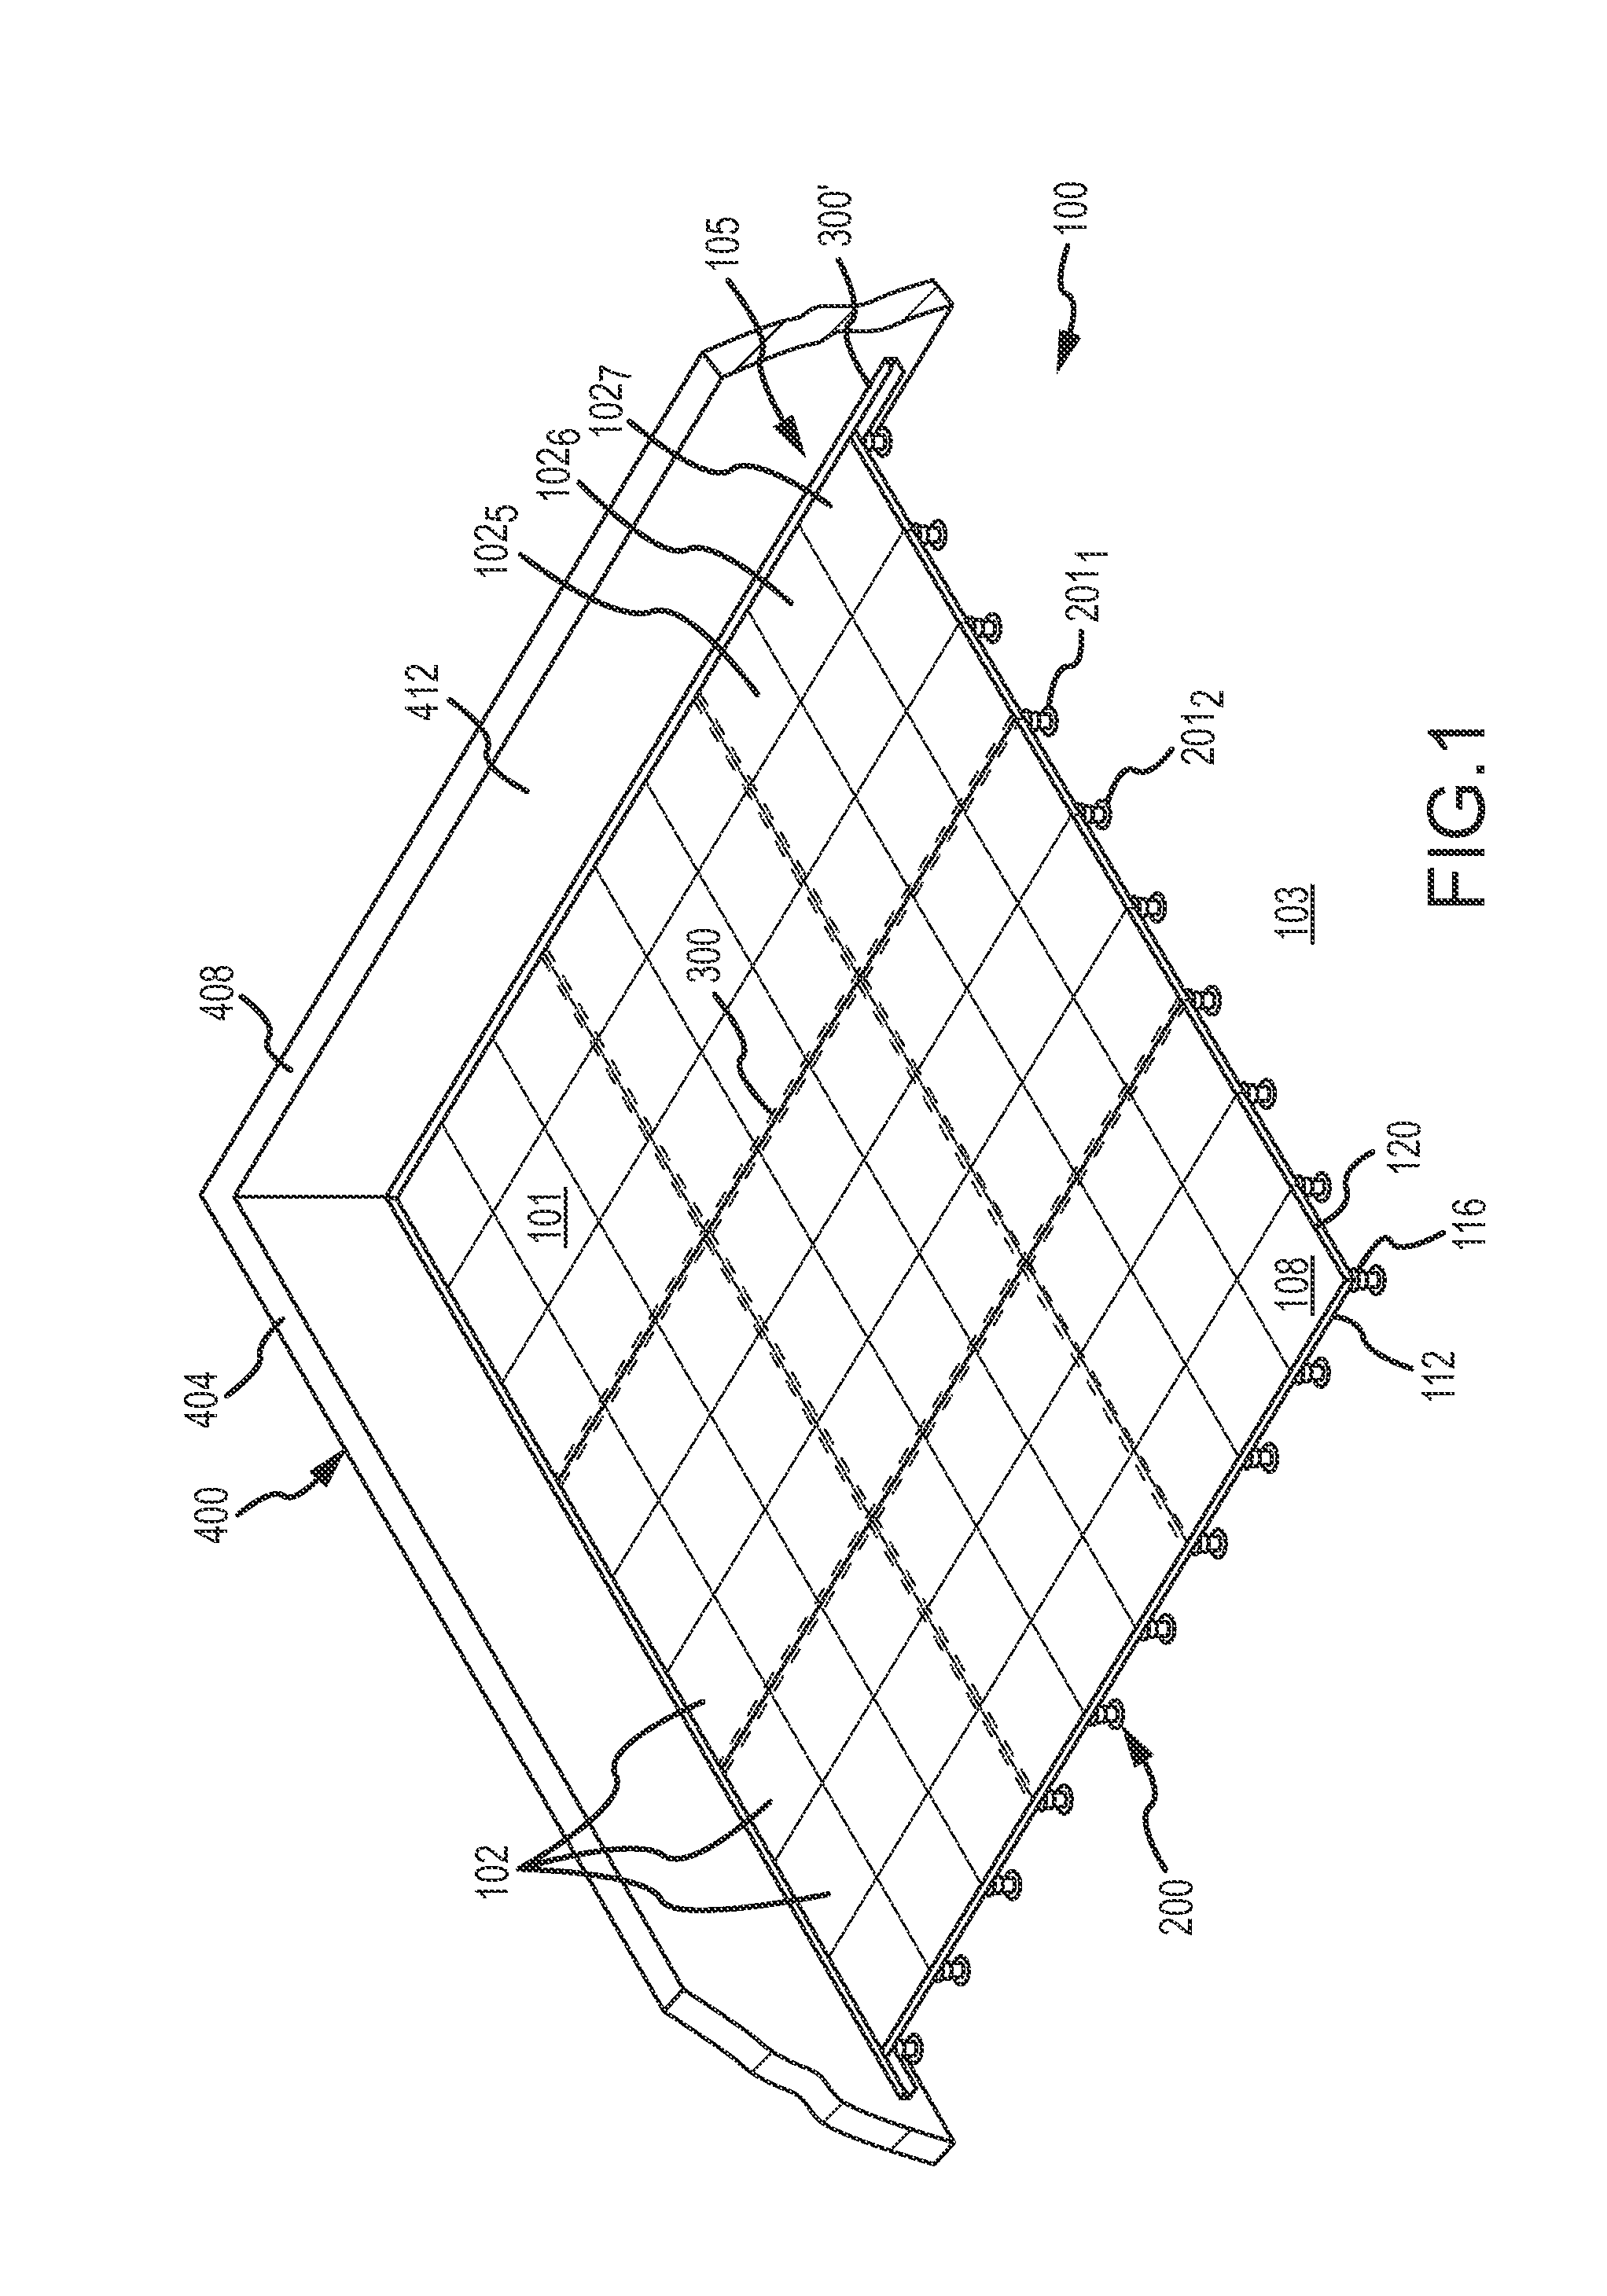 Field paver connector and restraining system